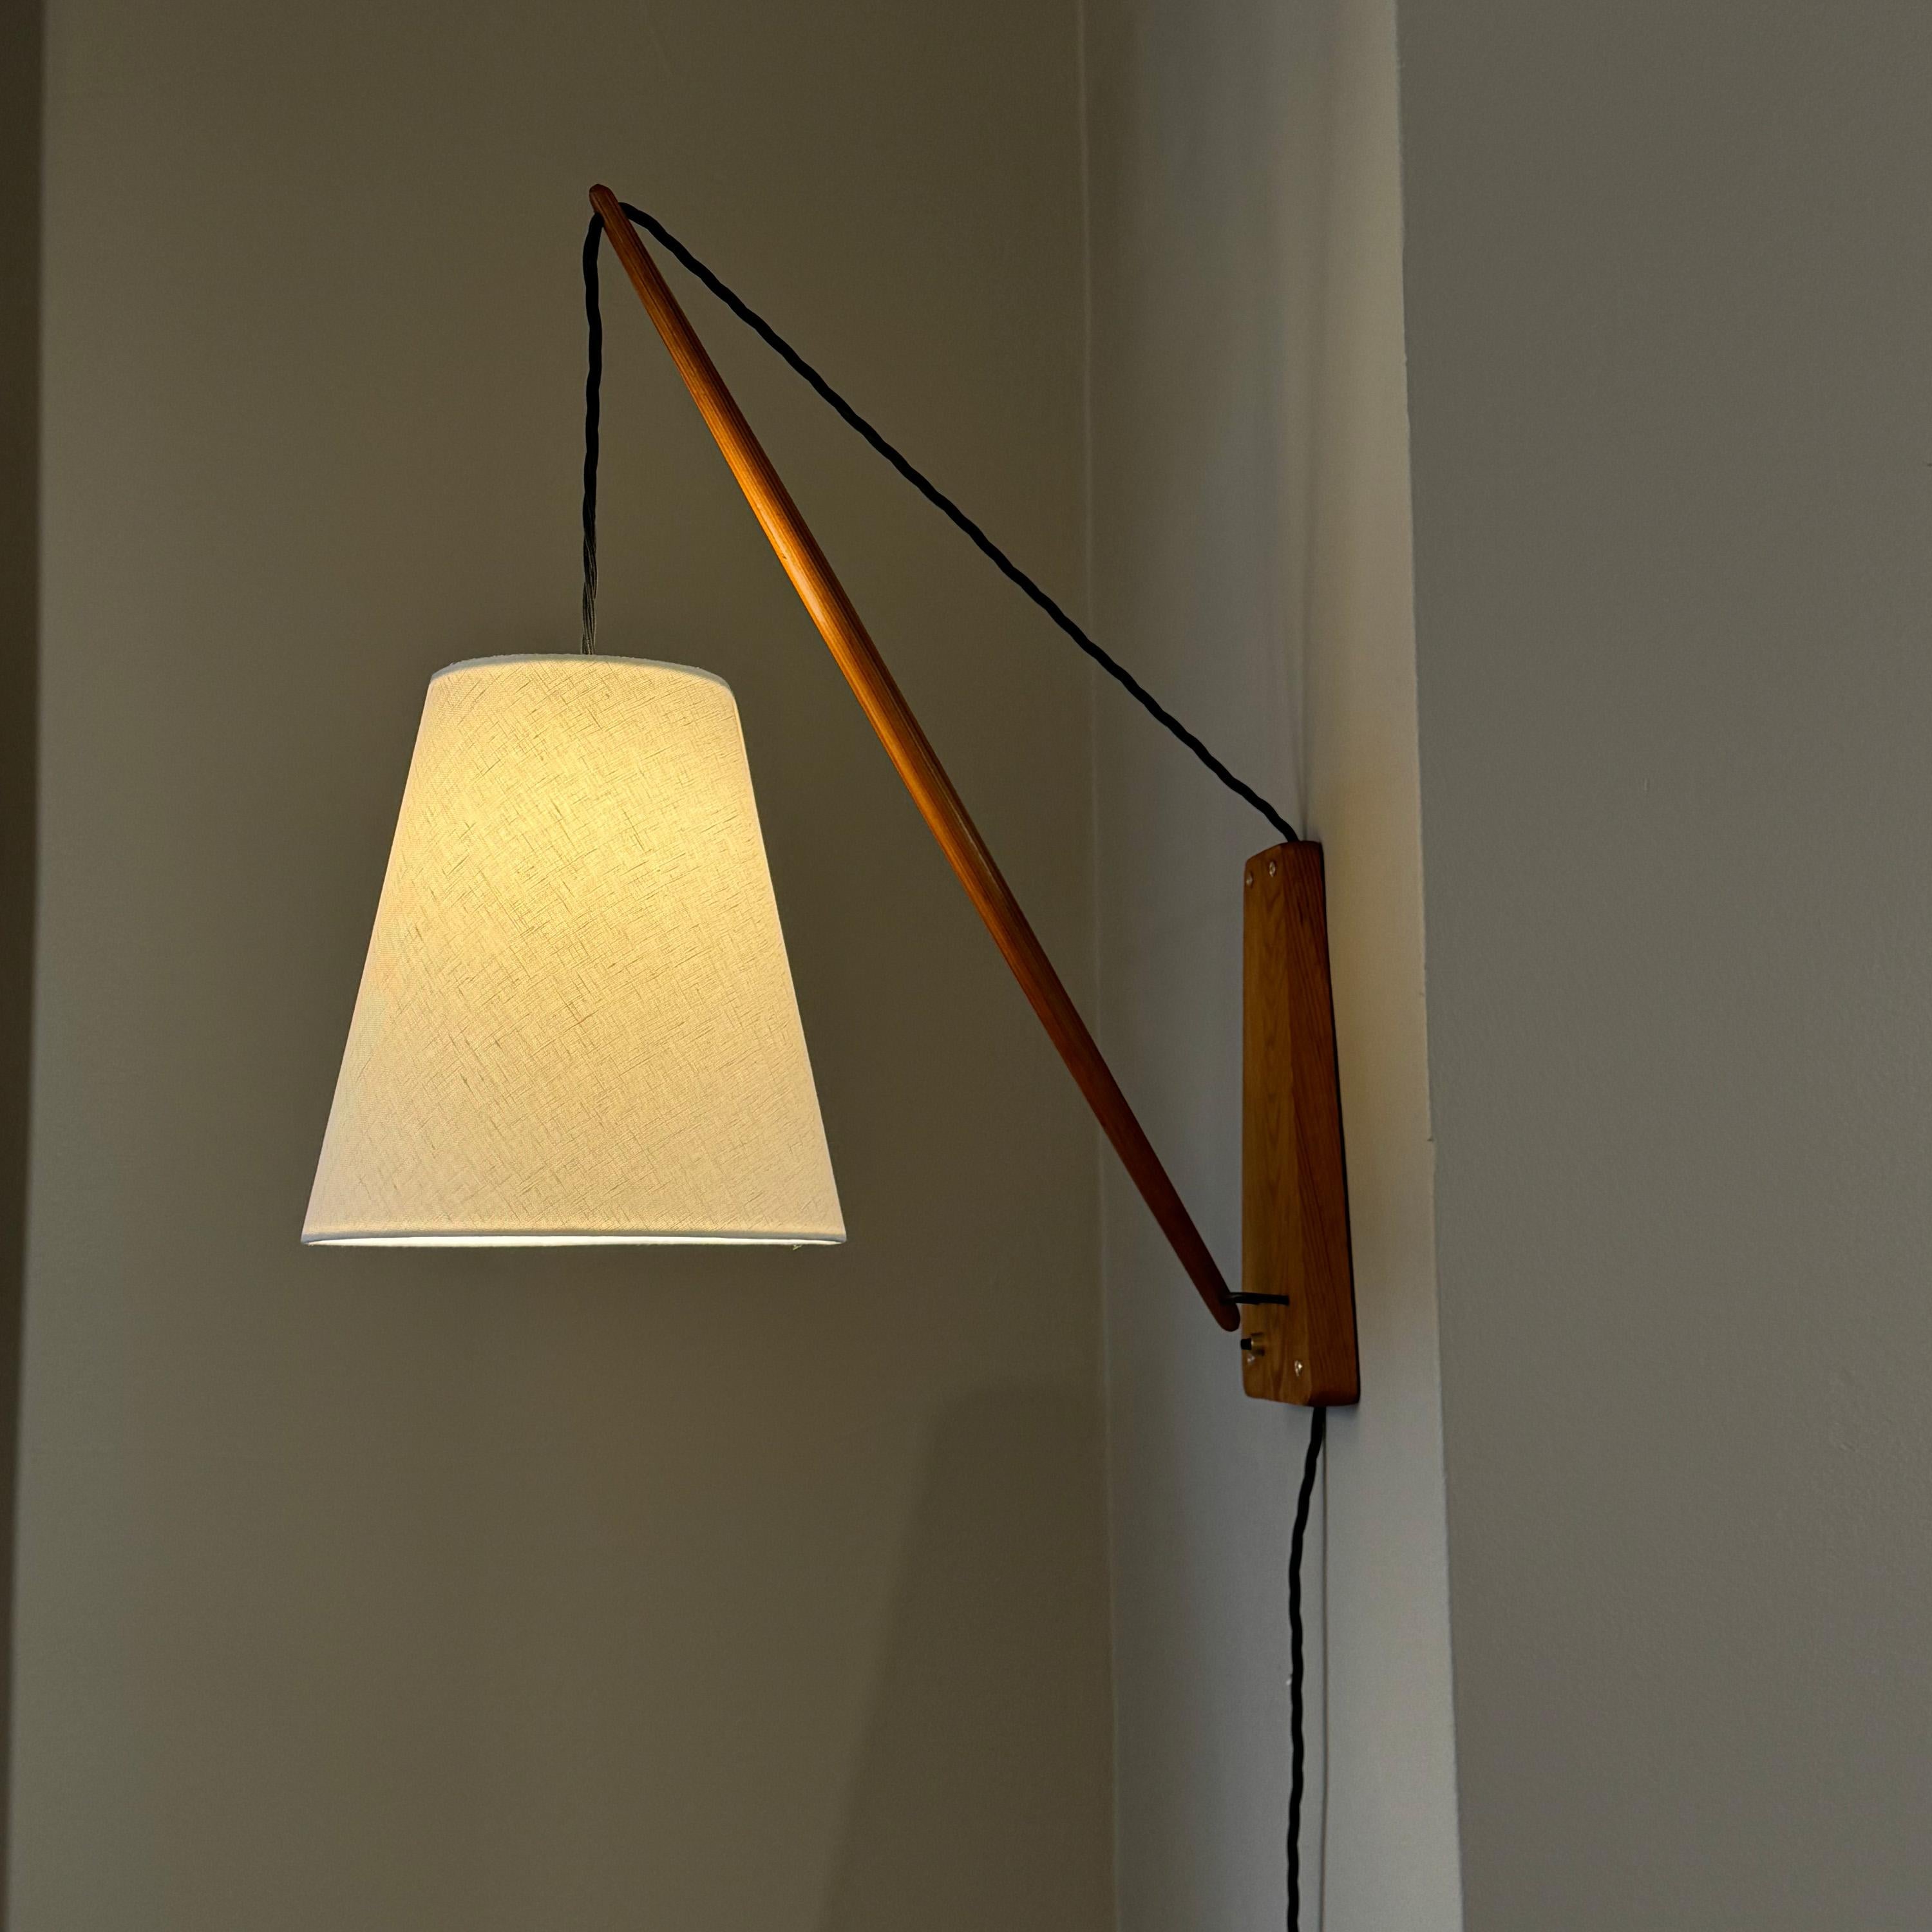 A pine wall light made in Denmark during the 1950s. 

Simple yet sculptural, this wall light is constructed from two main components: a trapezoid shaped wall plate which is connected to a cigar-shaped pine armature via a small metal component, which